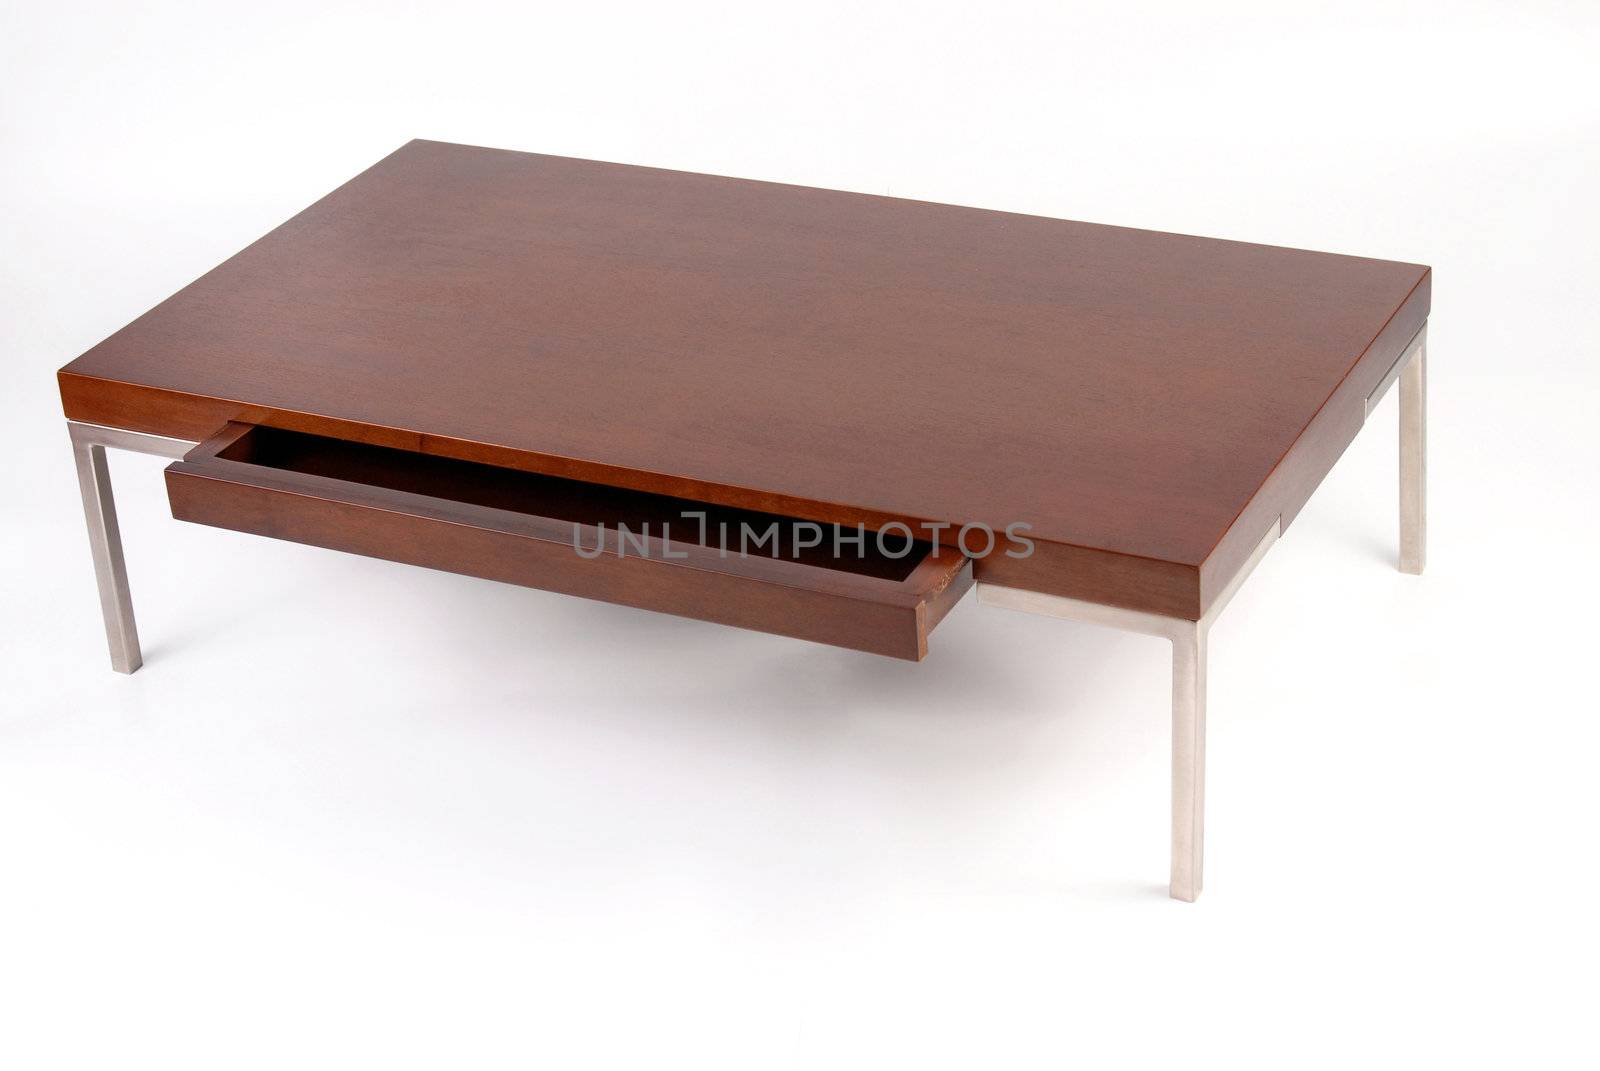 Wooden and metal coffee table with an open drawer. Isolated on white background